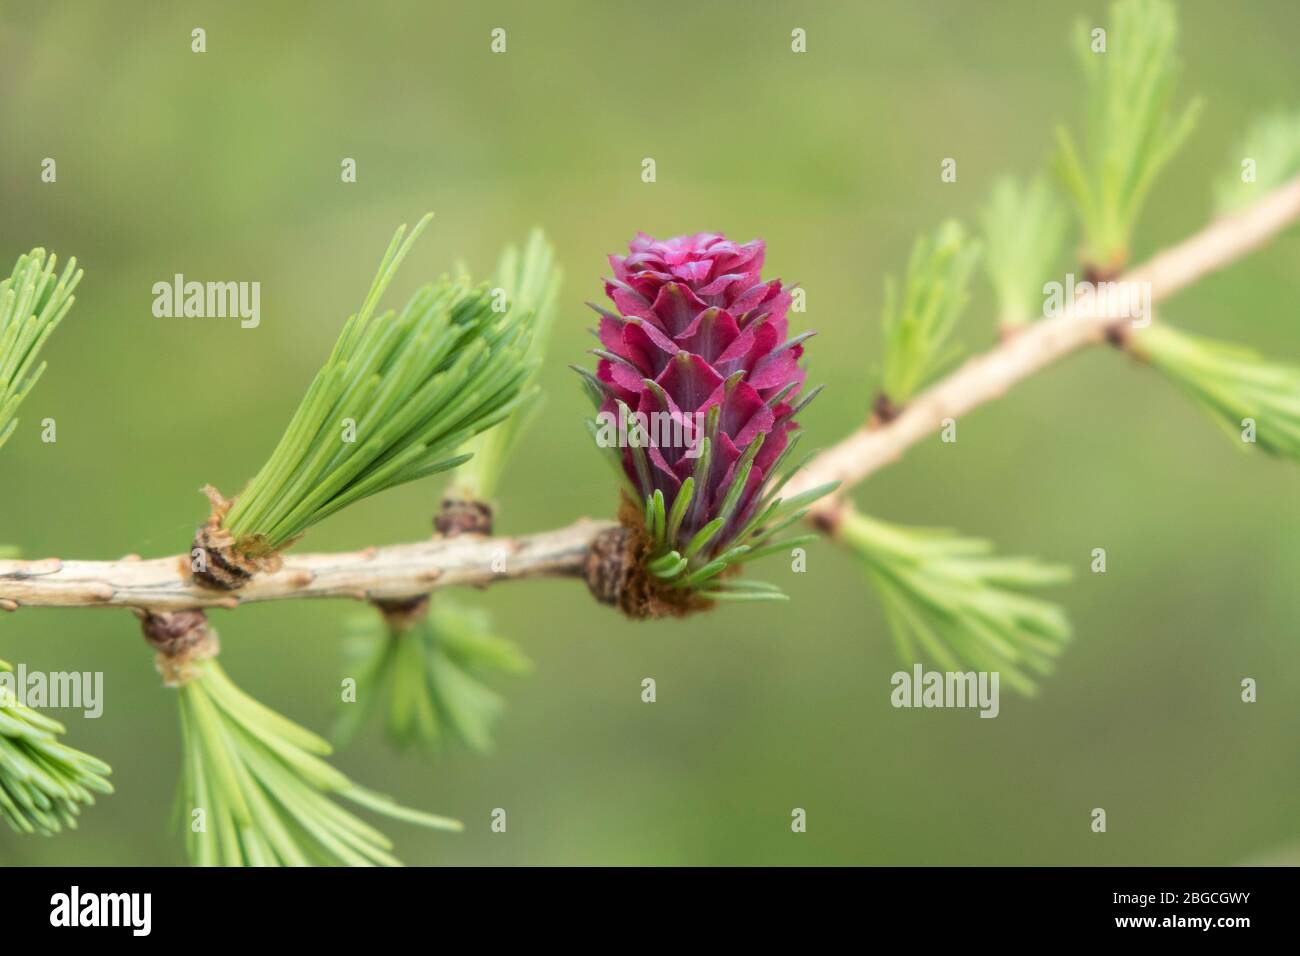 The Female Flower of the European Larch Tree Larix decidua, UK. The purple flowers develop into the cones as they mature. Stock Photo